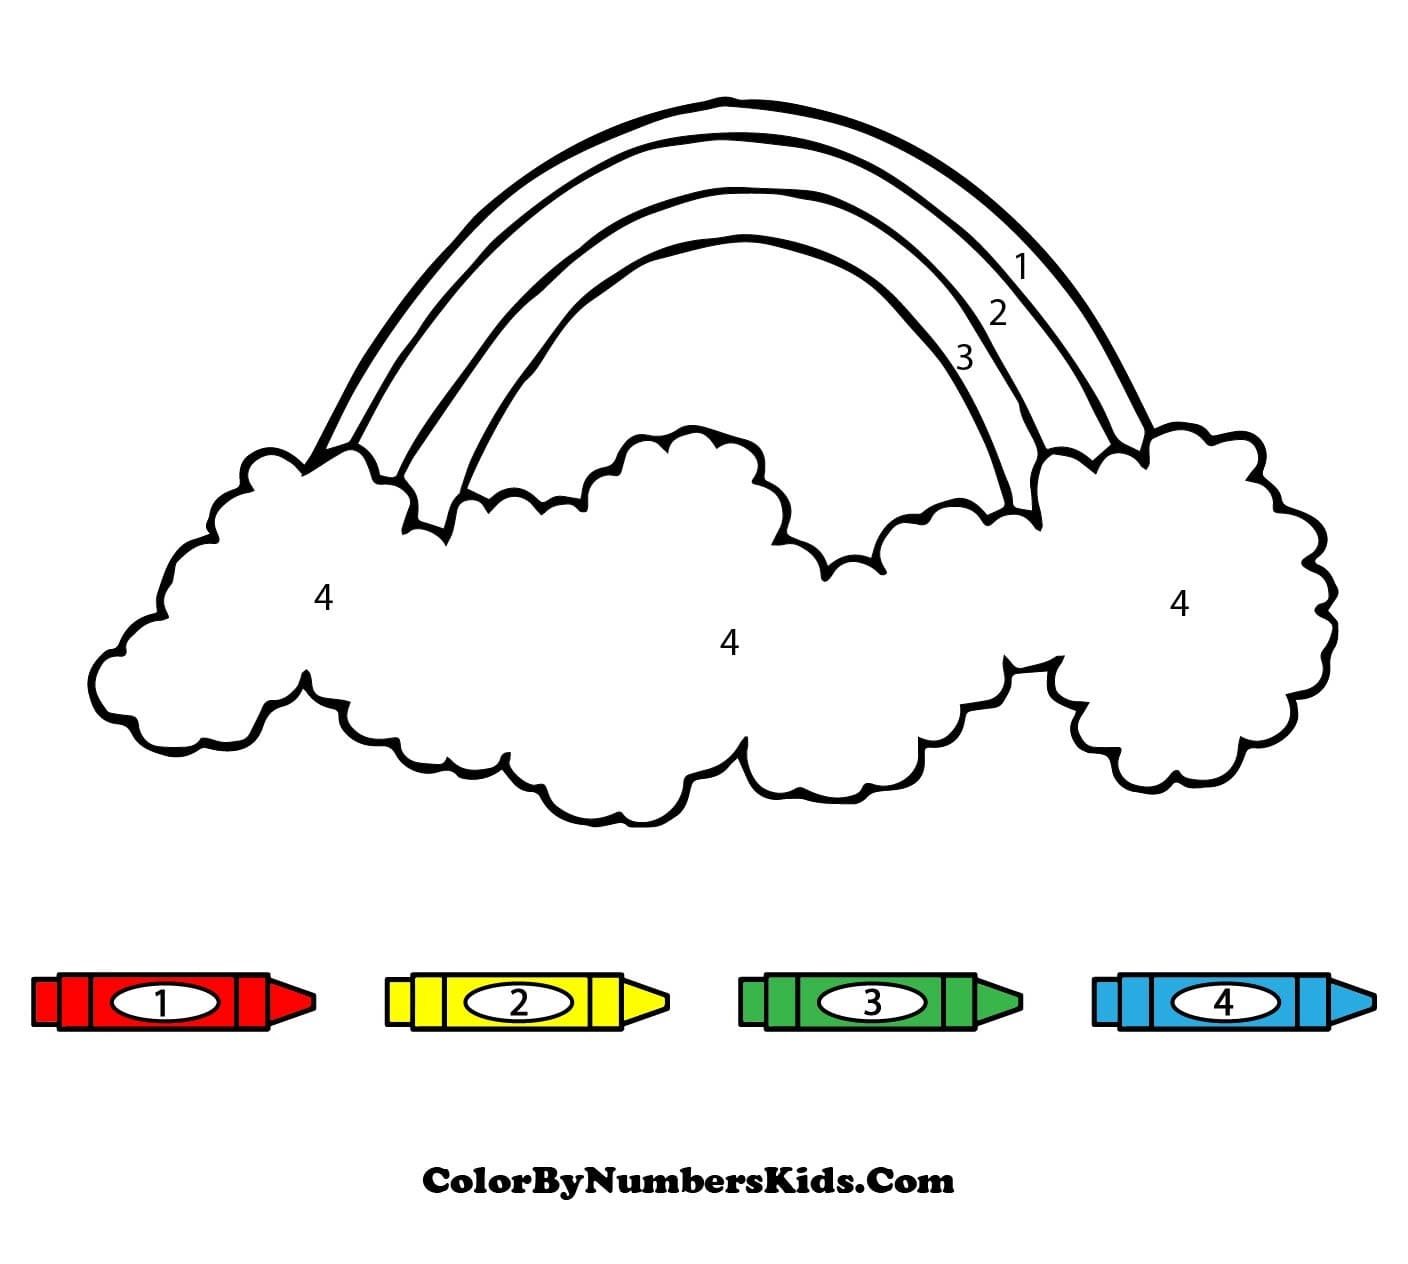 Rainbow Color By Number For Kids